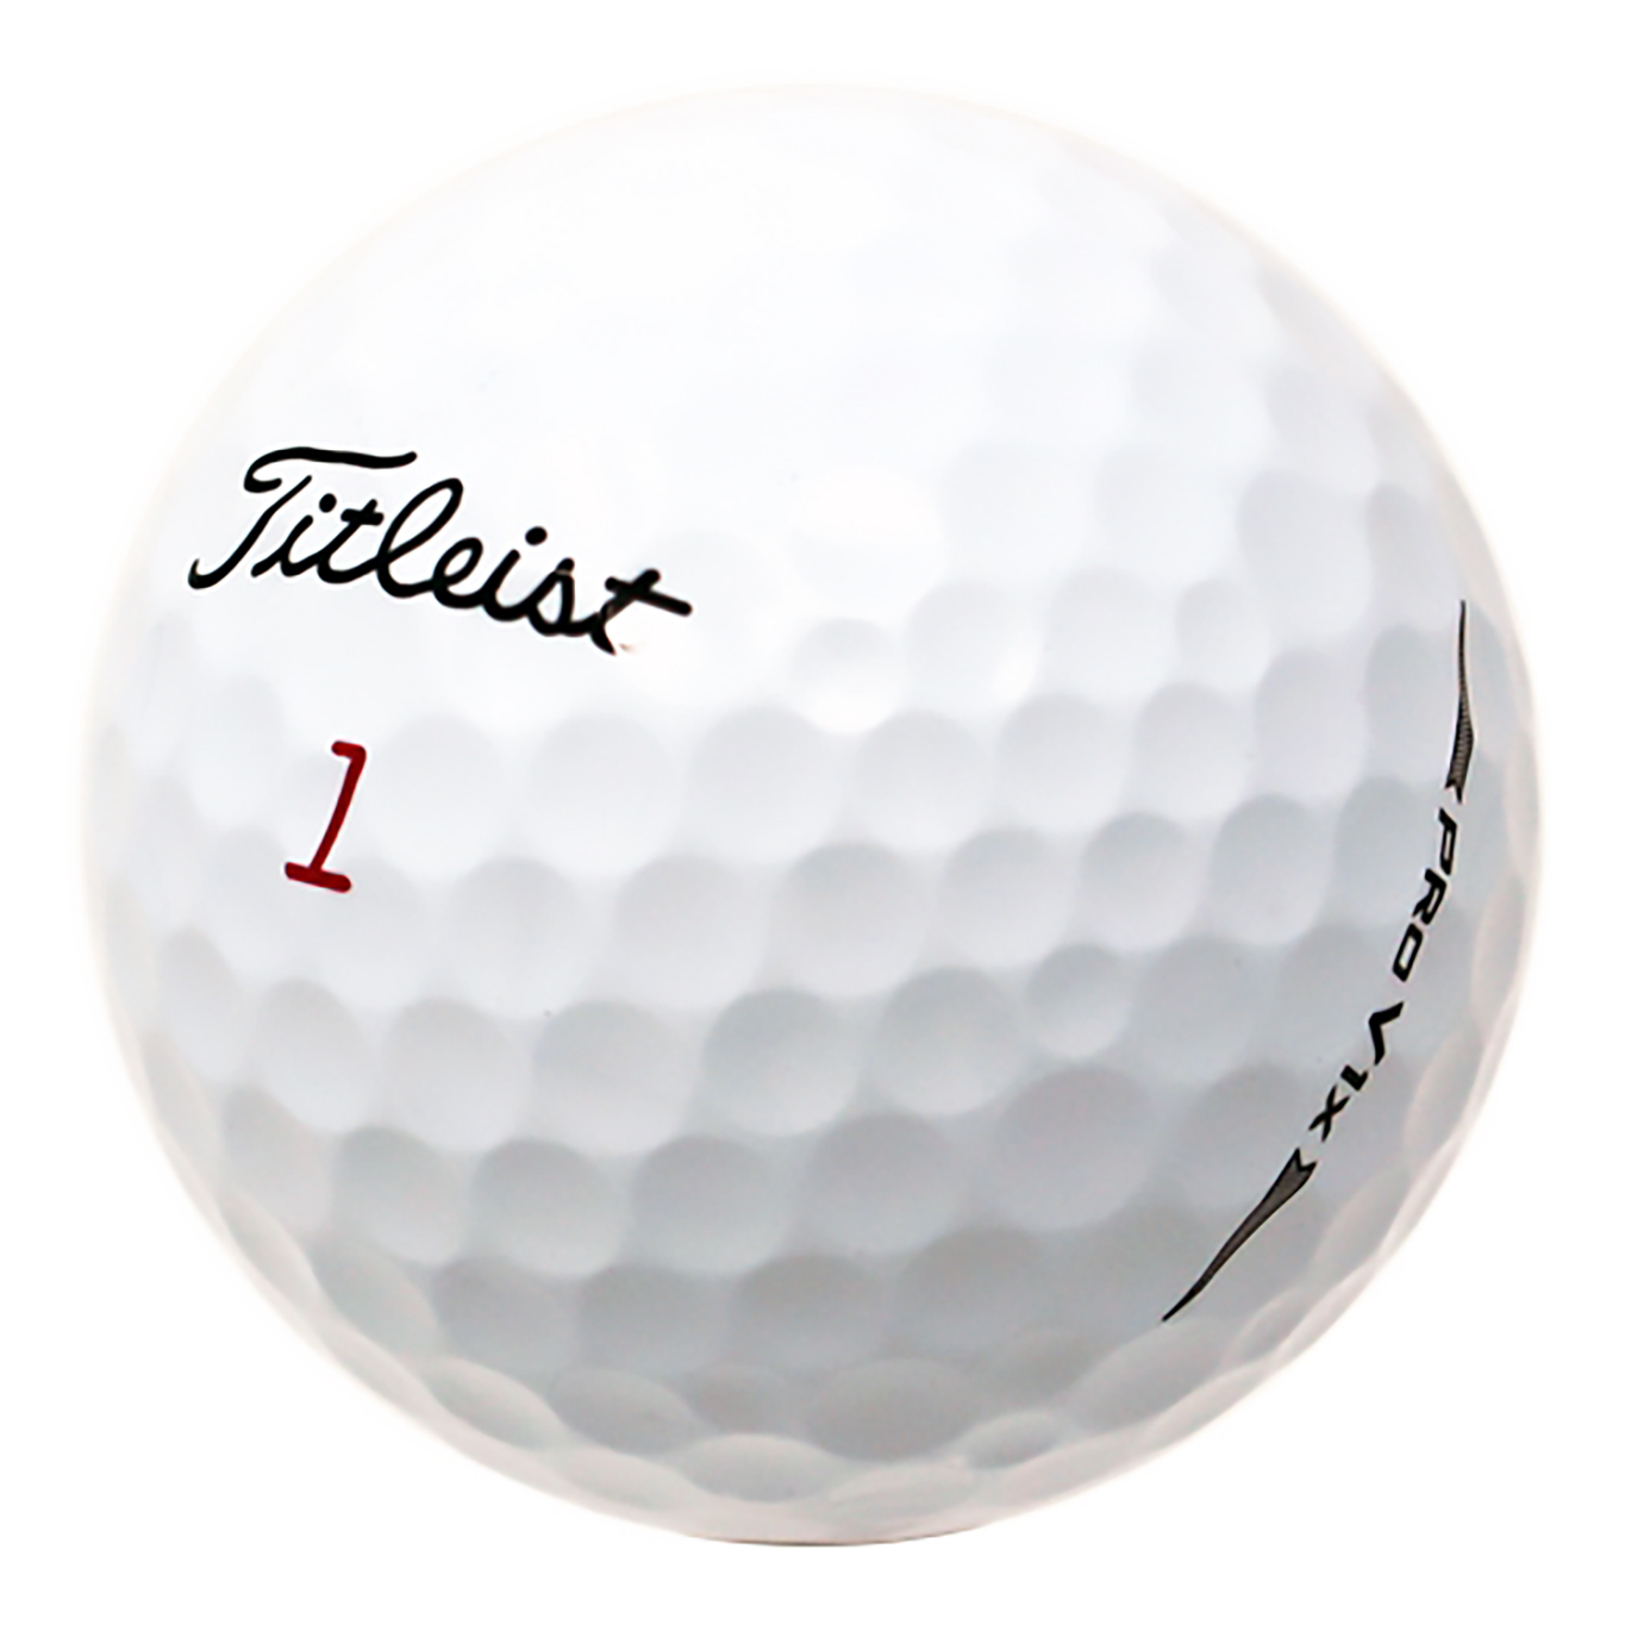 Titleist Pro V1x Golf Balls, Mint Refinished Quality, 30 Pack, White - image 1 of 9